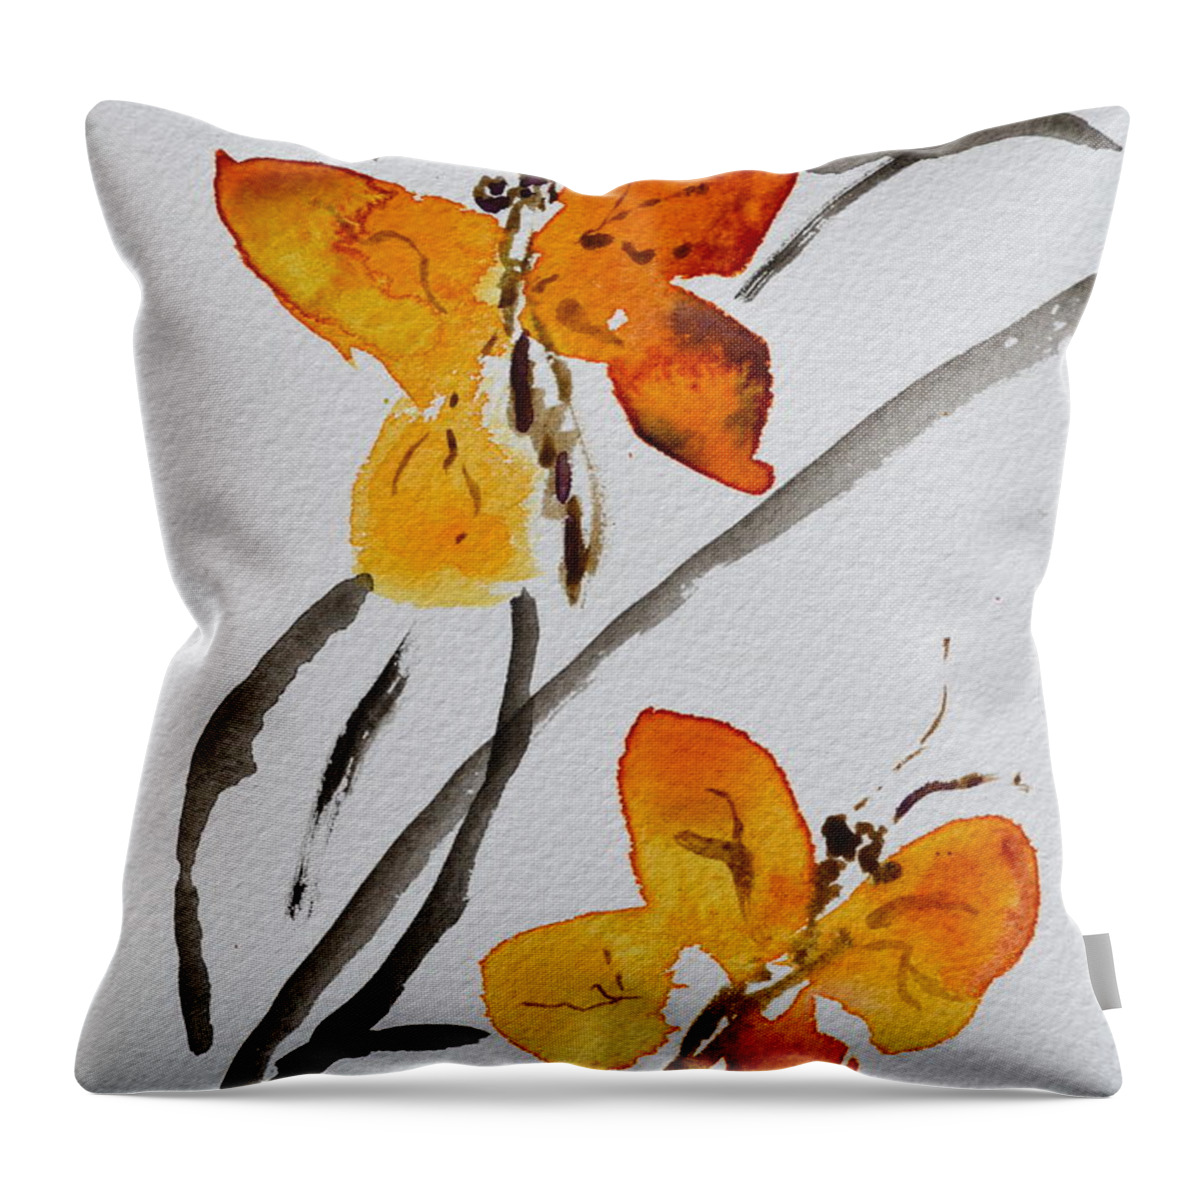 Butterflies Throw Pillow featuring the painting Harmonious Flight by Beverley Harper Tinsley